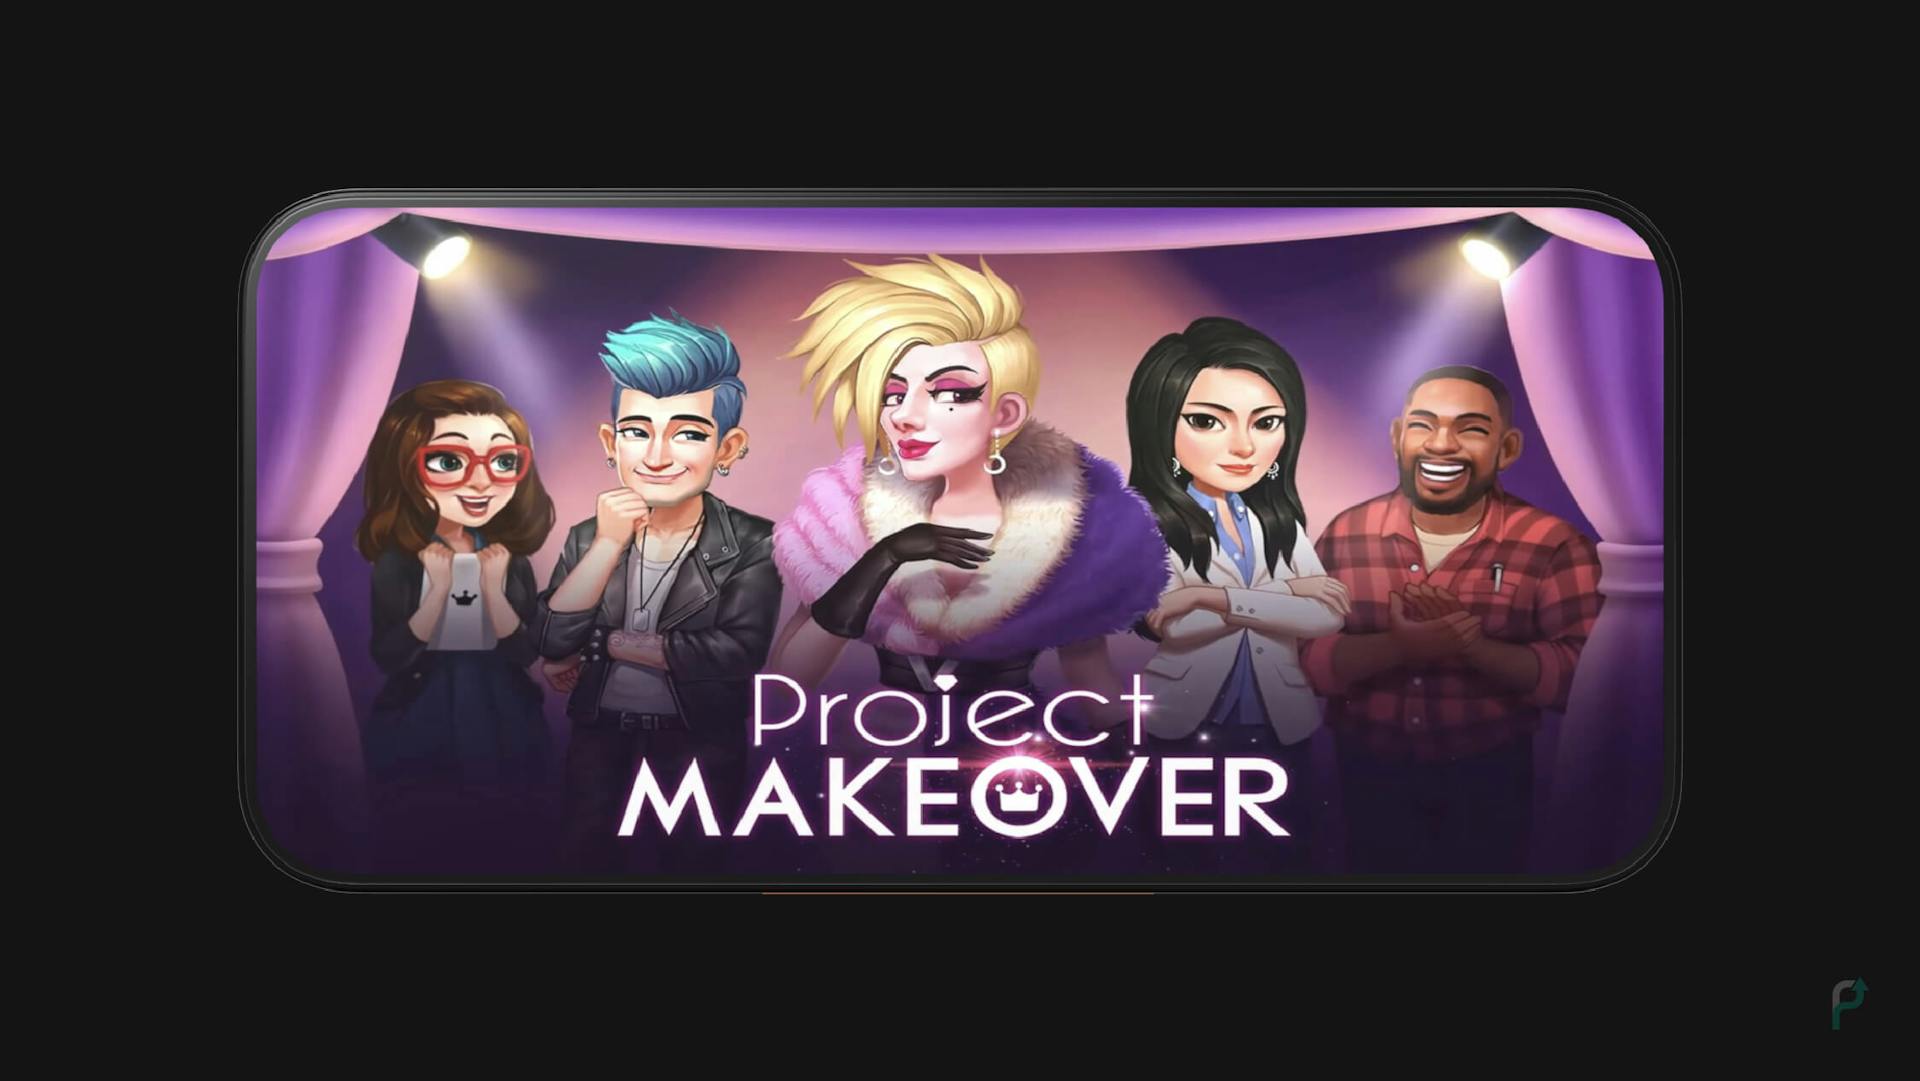 Project makeover